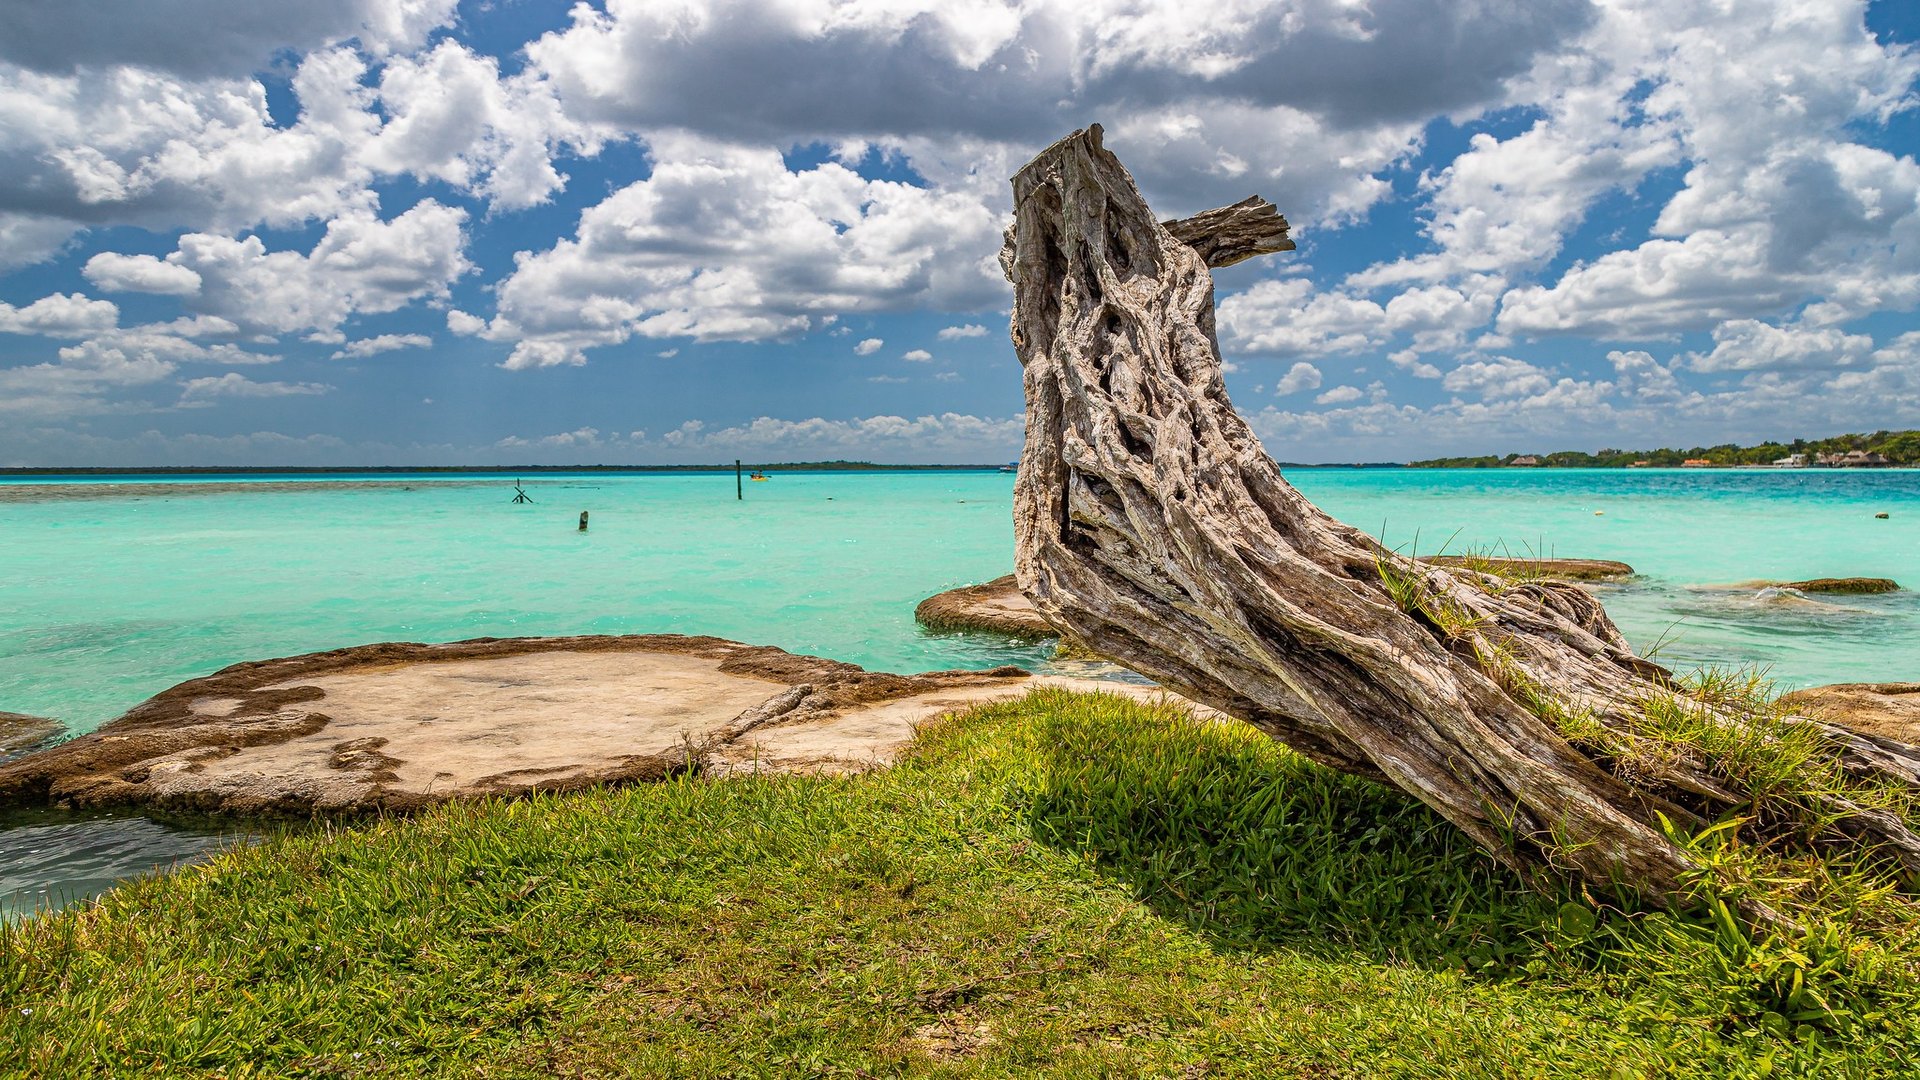 General 1920x1080 landscape nature sky lake grass clouds Bacalar Mexico tree trunk